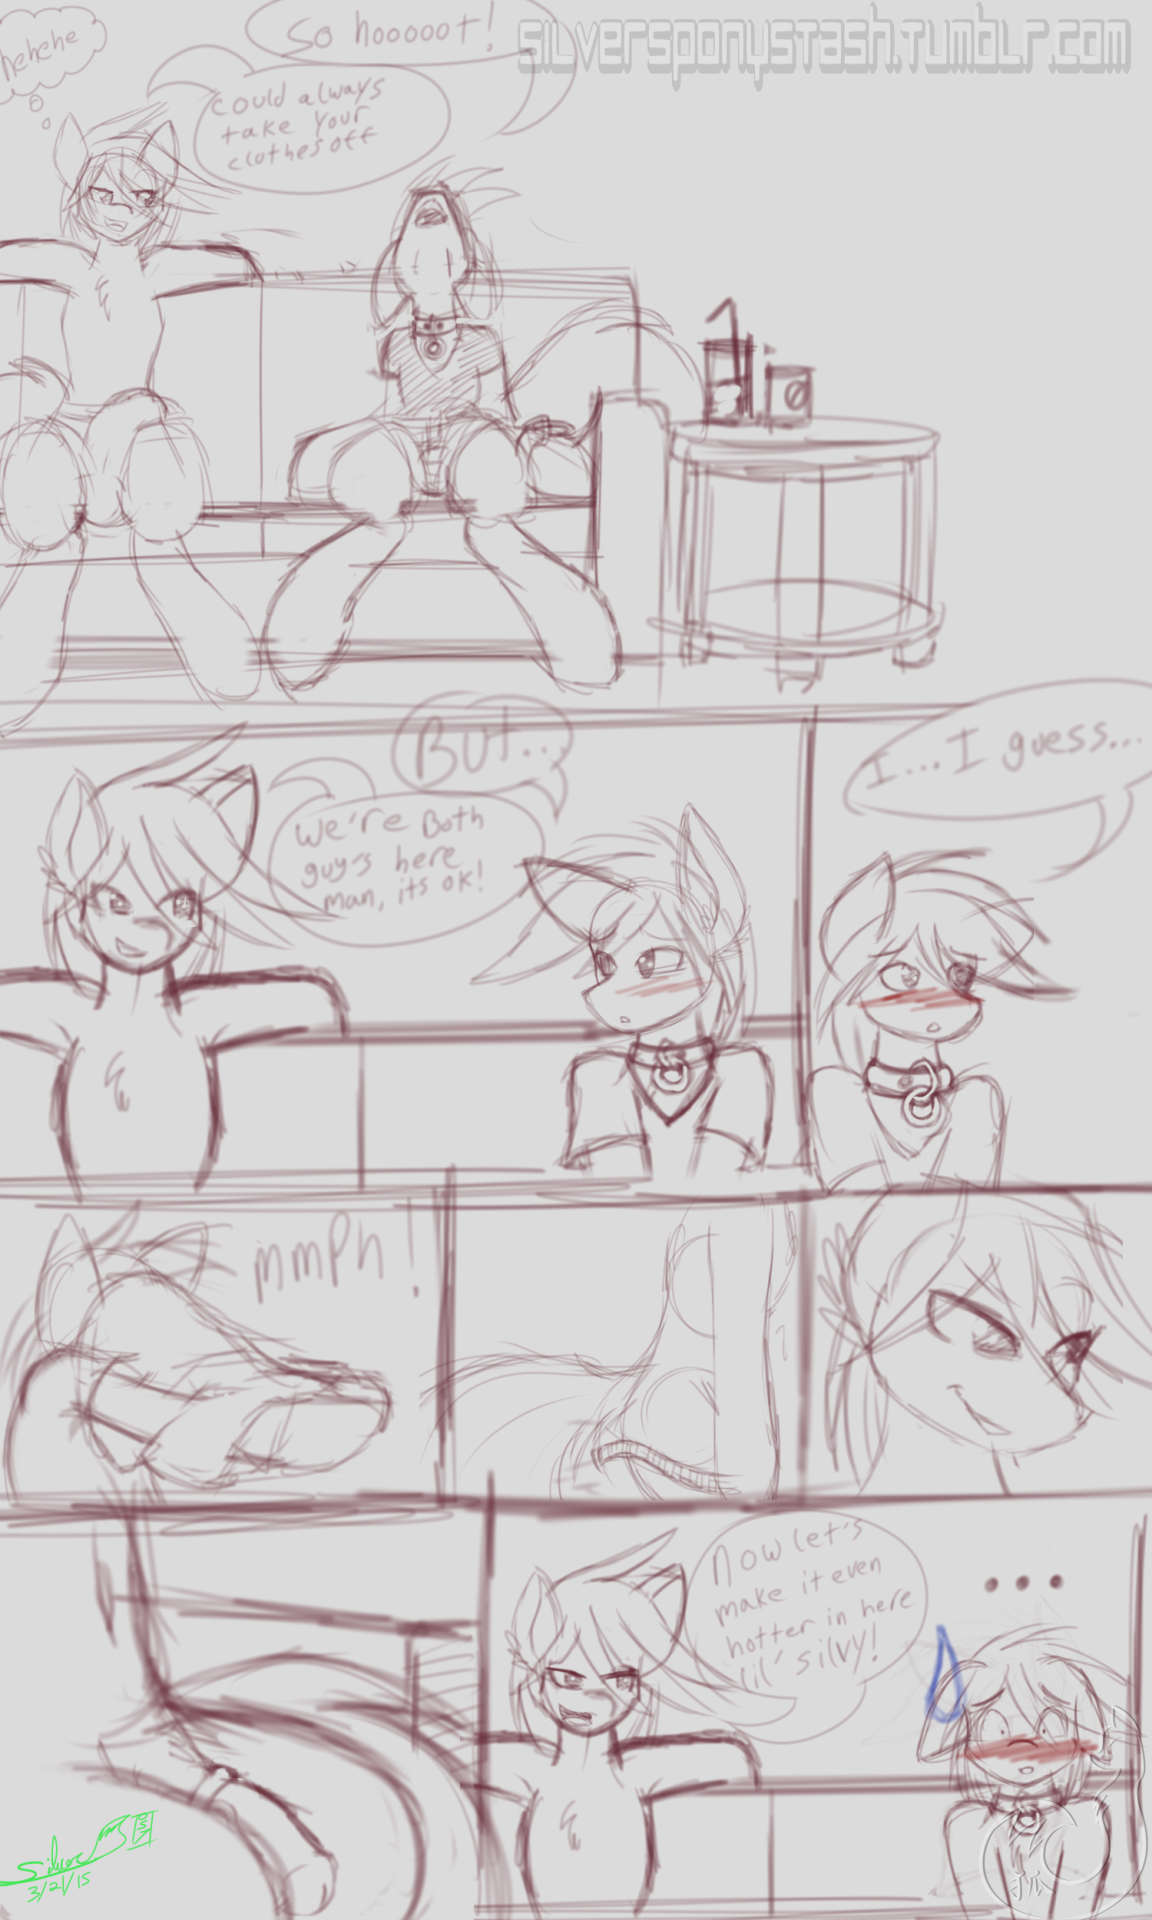 silversponystash:little doodle comic for a warm upstallion silvy and his roommate